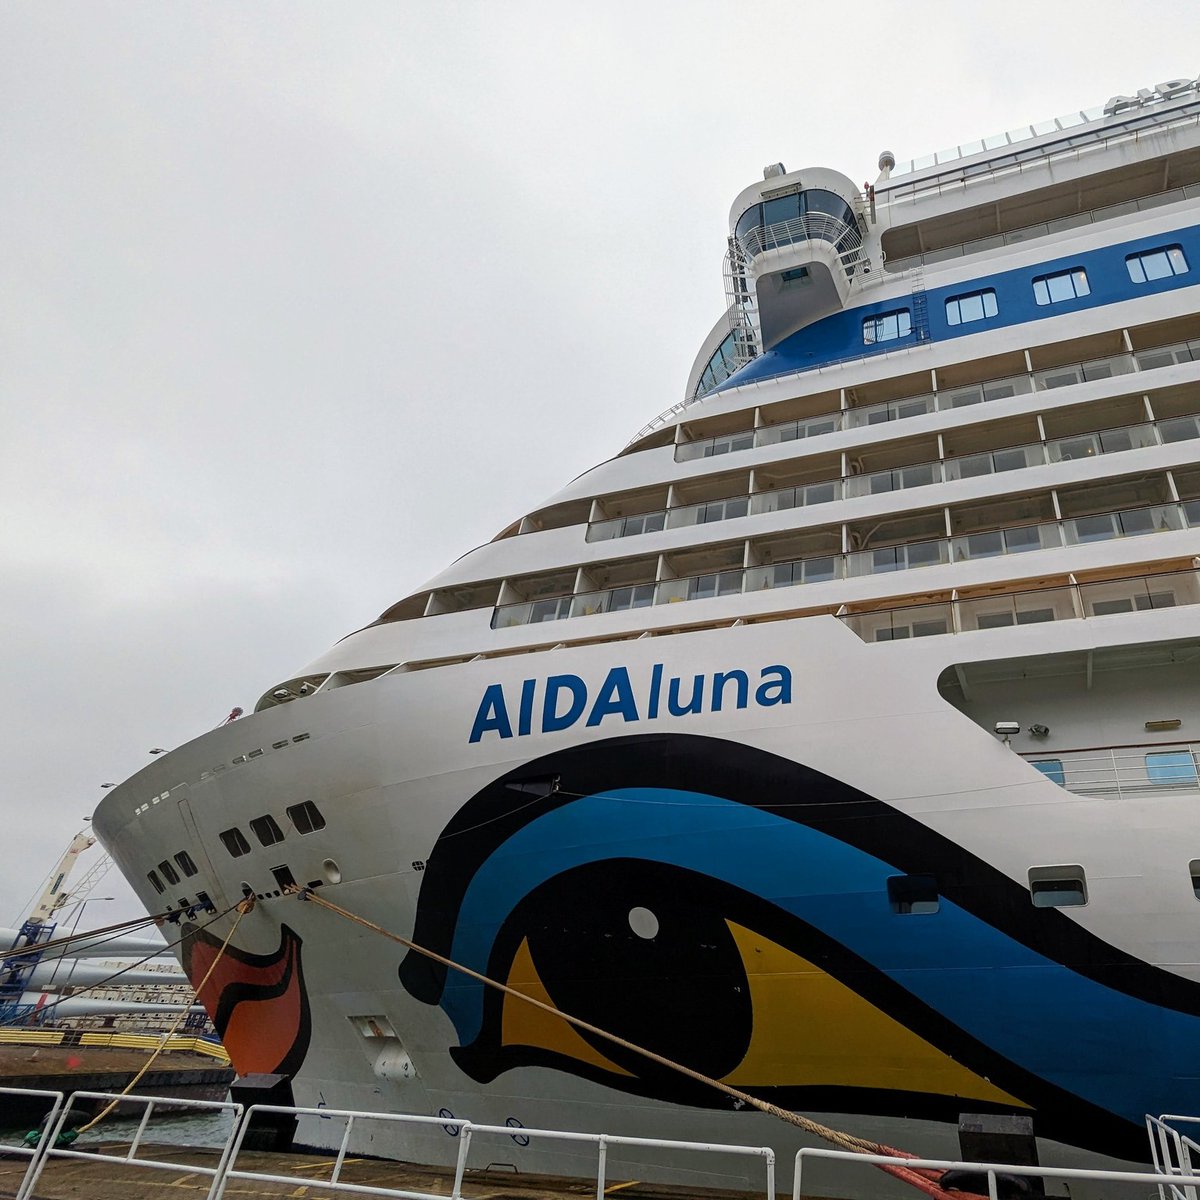 A warm welcome for @aida_cruises AIDAluna today, as the ship's 2000 passengers enjoyed a visit to Portsmouth. The @shapingportsmouth Ambassadors were on hand to provide inspiration, and Captain Sven Gärtner accepted a plaque to mark their maiden call from our pilot Jerry Clarke.